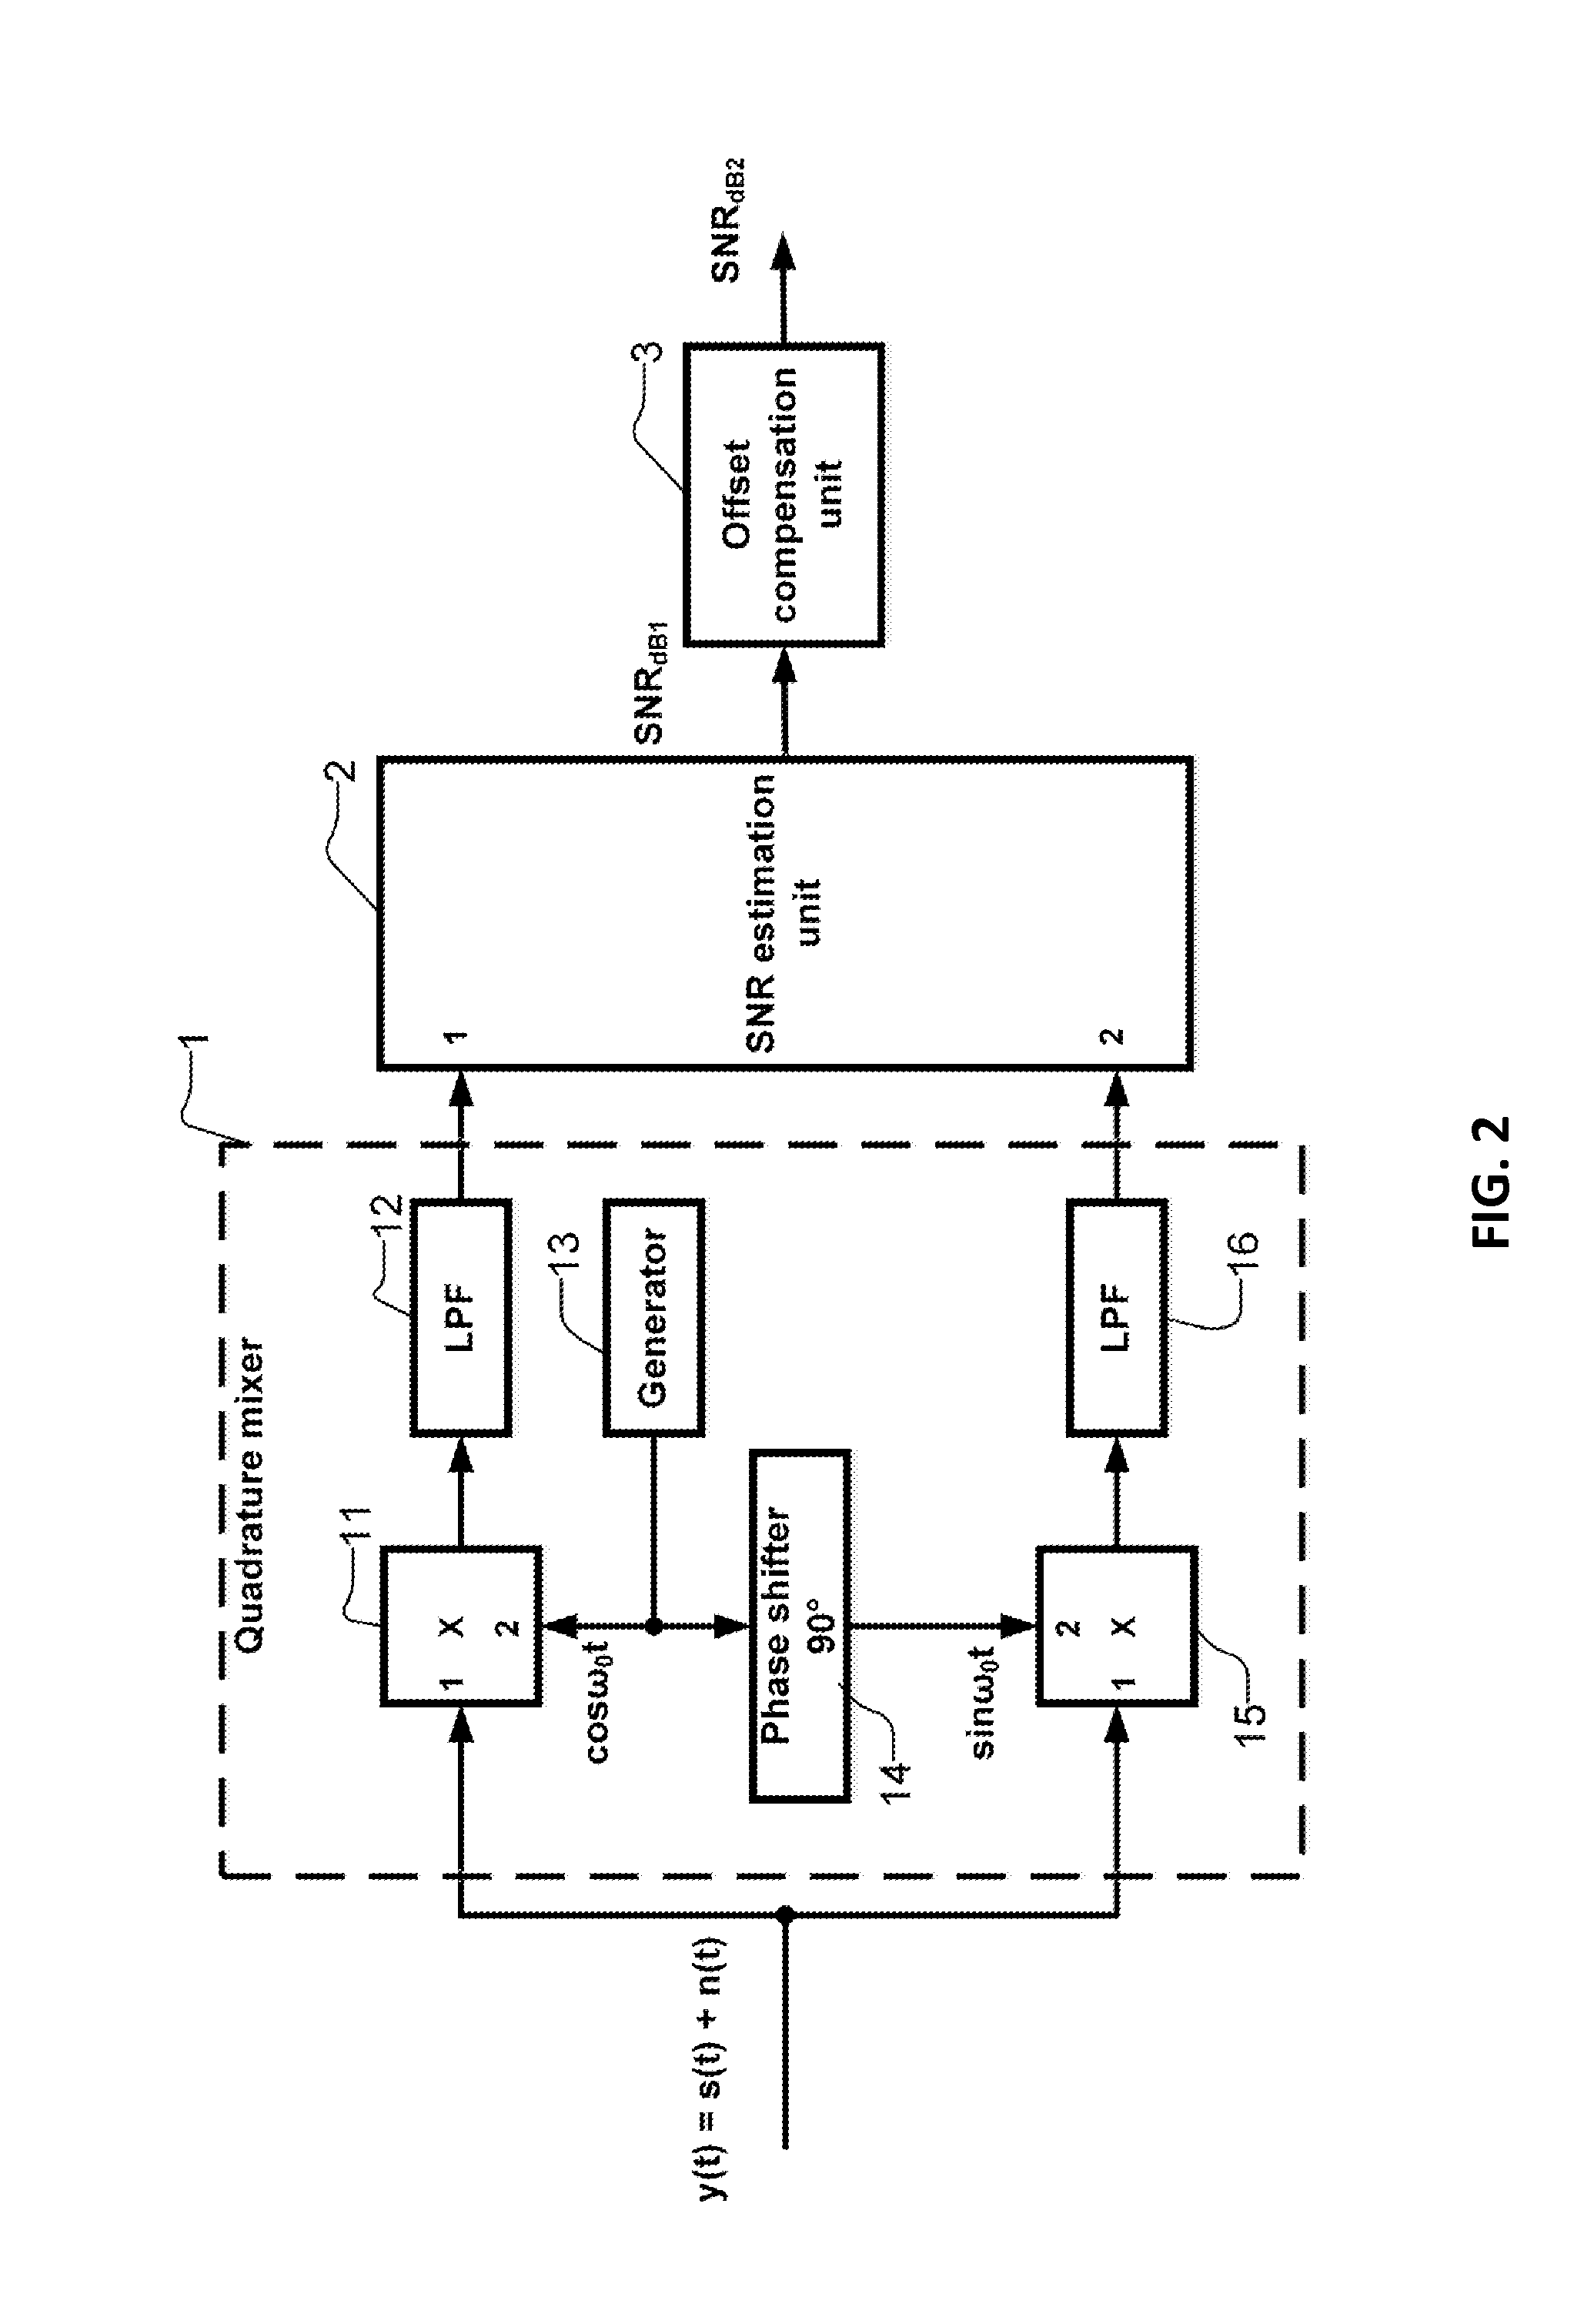 Method and apparatus for estimating the current signal-to-noise ratio